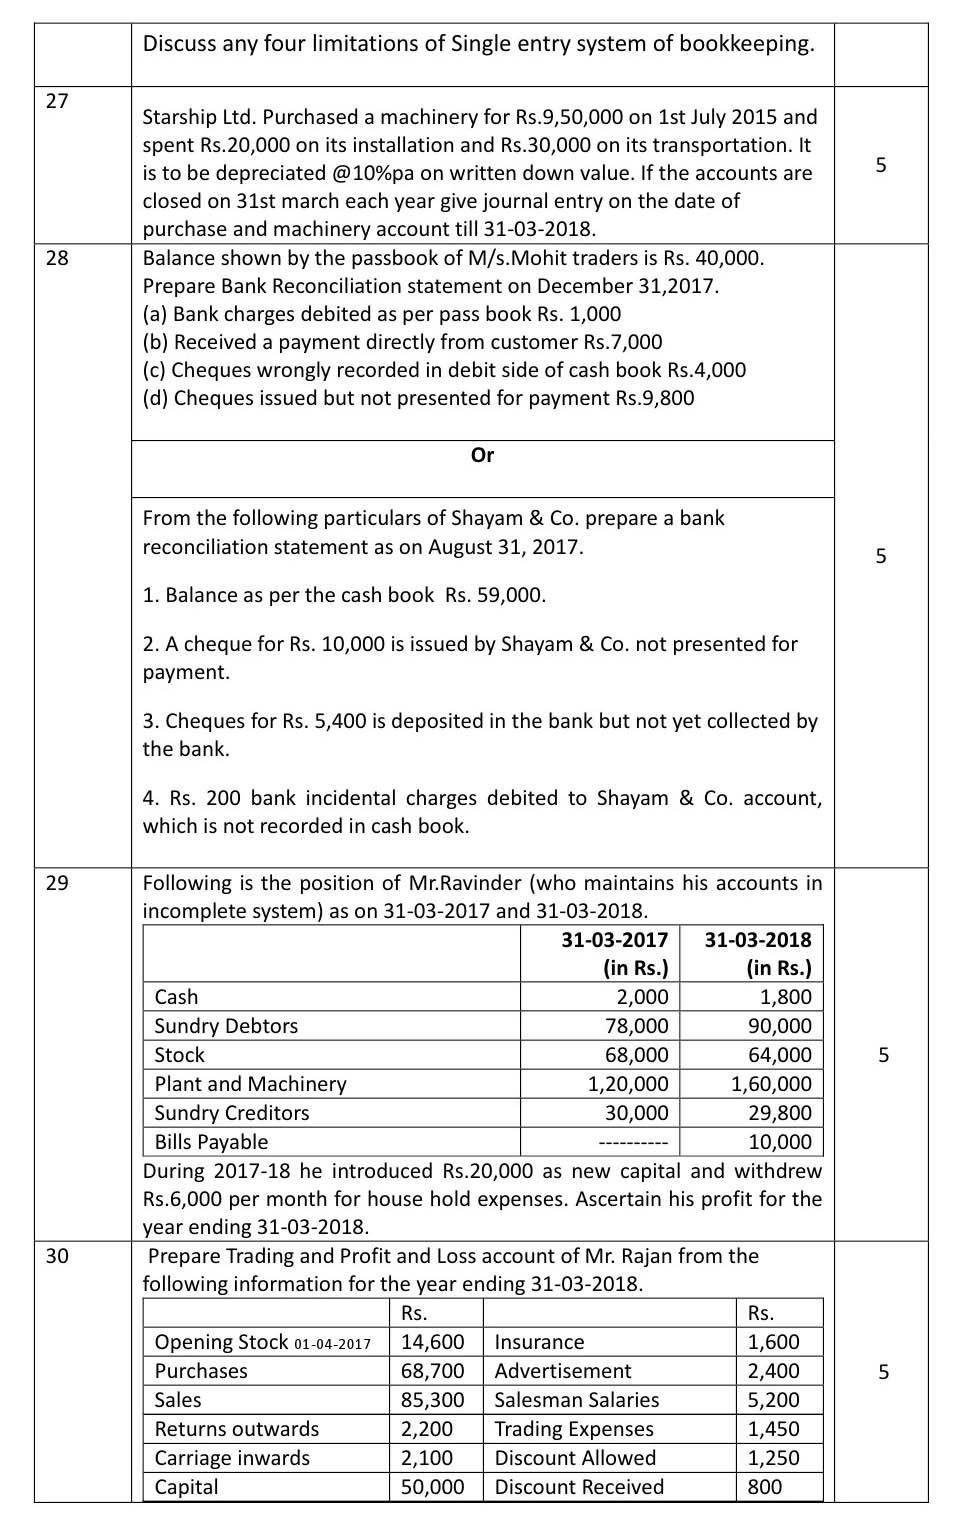 Elements of Book Keeping And Accountancy CBSE Class X Sample Question Paper 2018-19 - Image 5